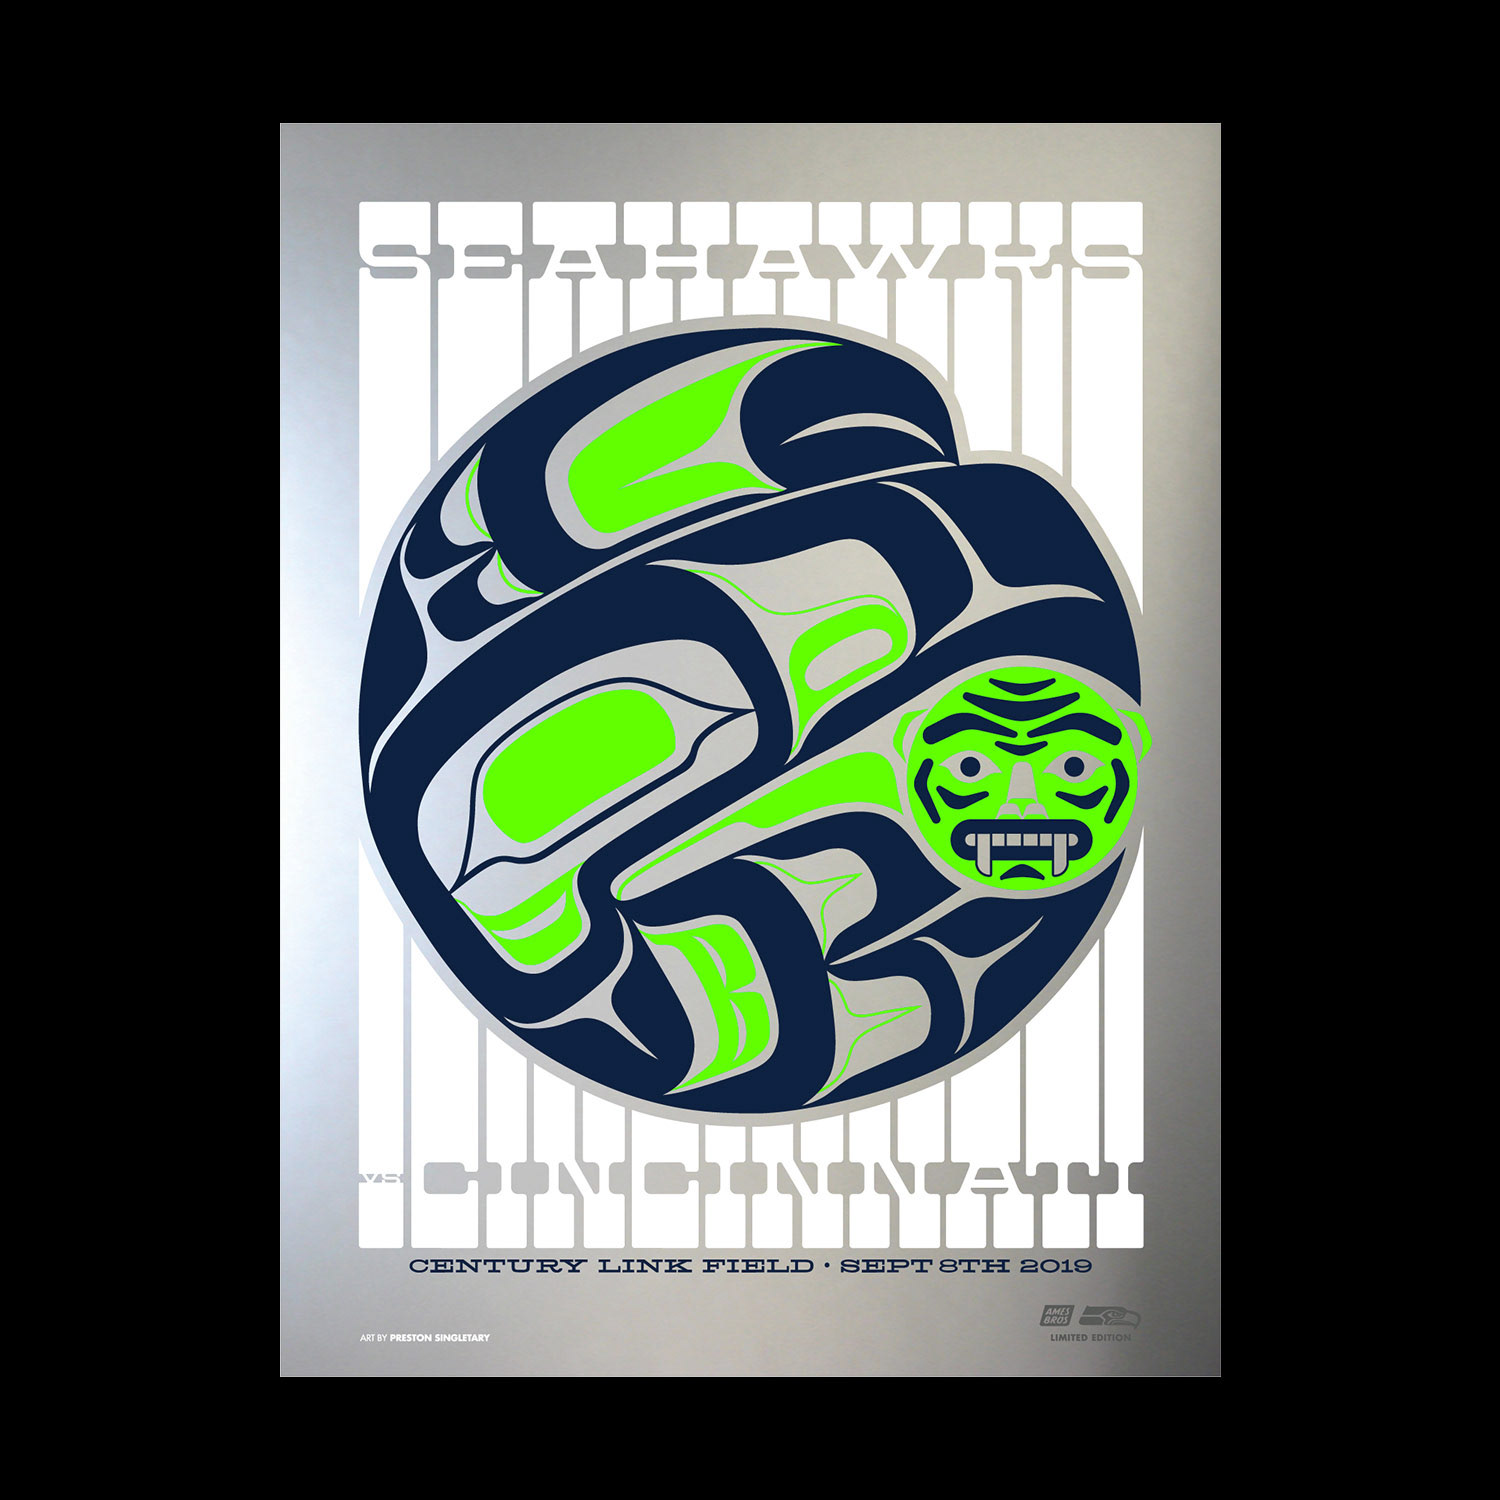 2021 Seahawks vs Cardinals Gameday Poster – Ames Bros